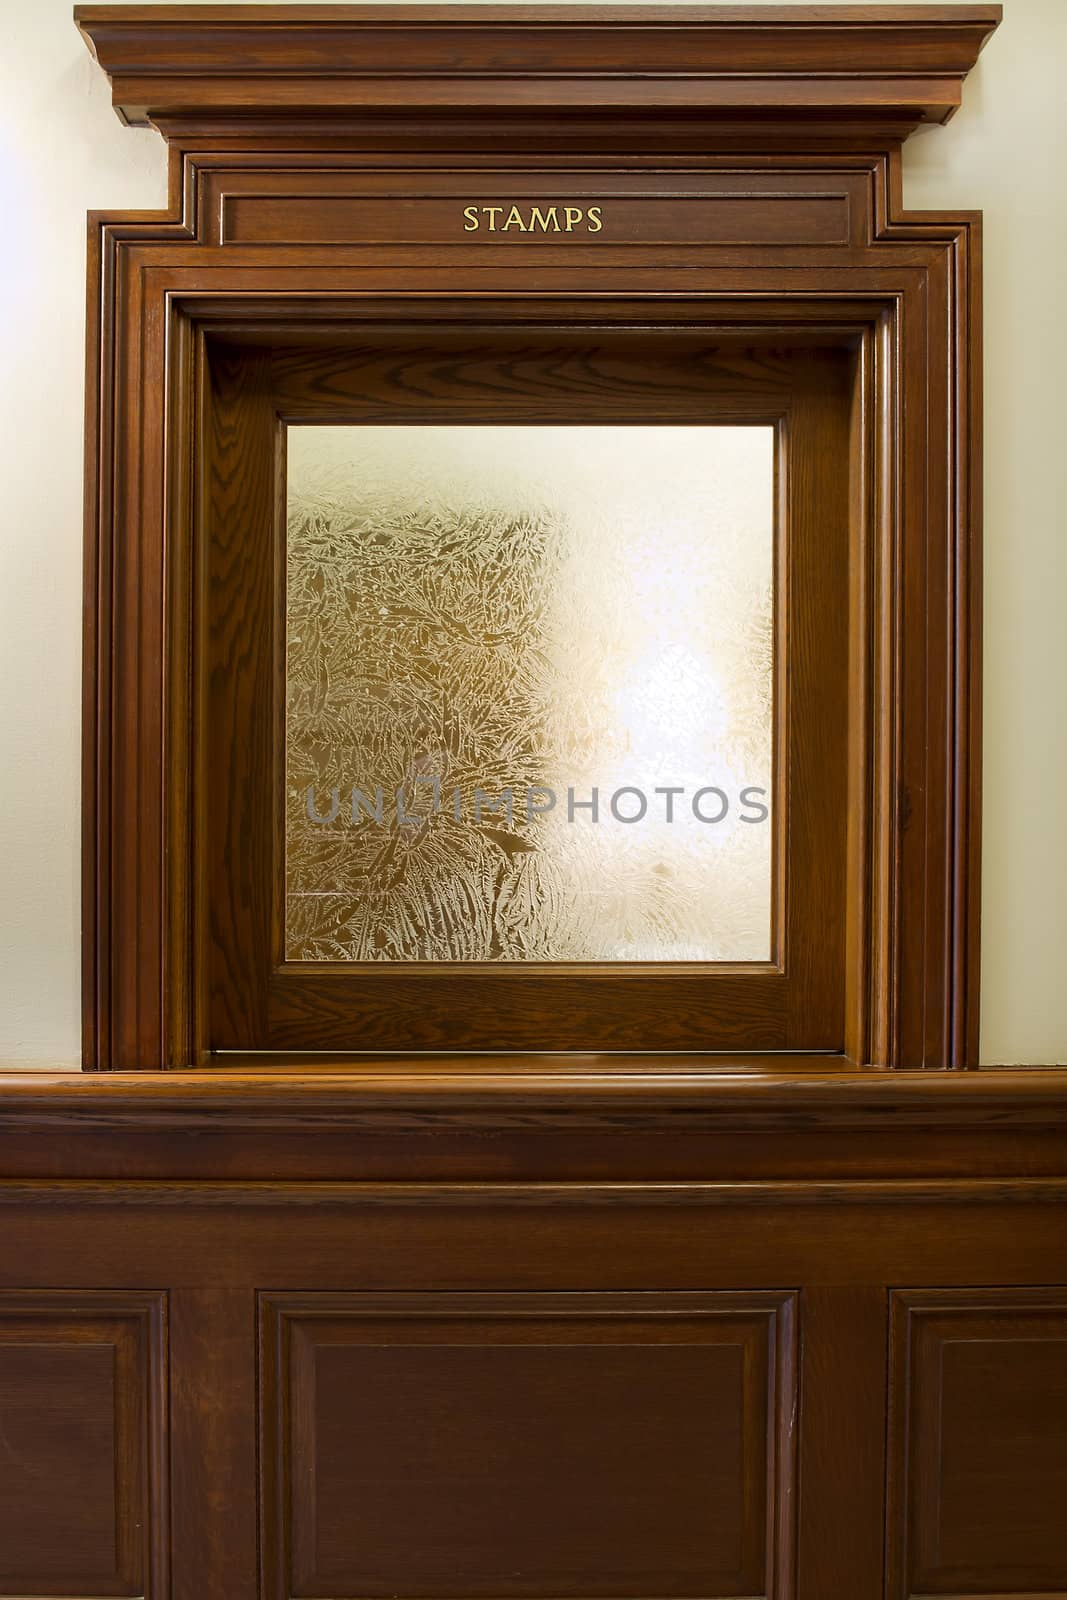 Historic Post Office Building Counter Windows by jpldesigns